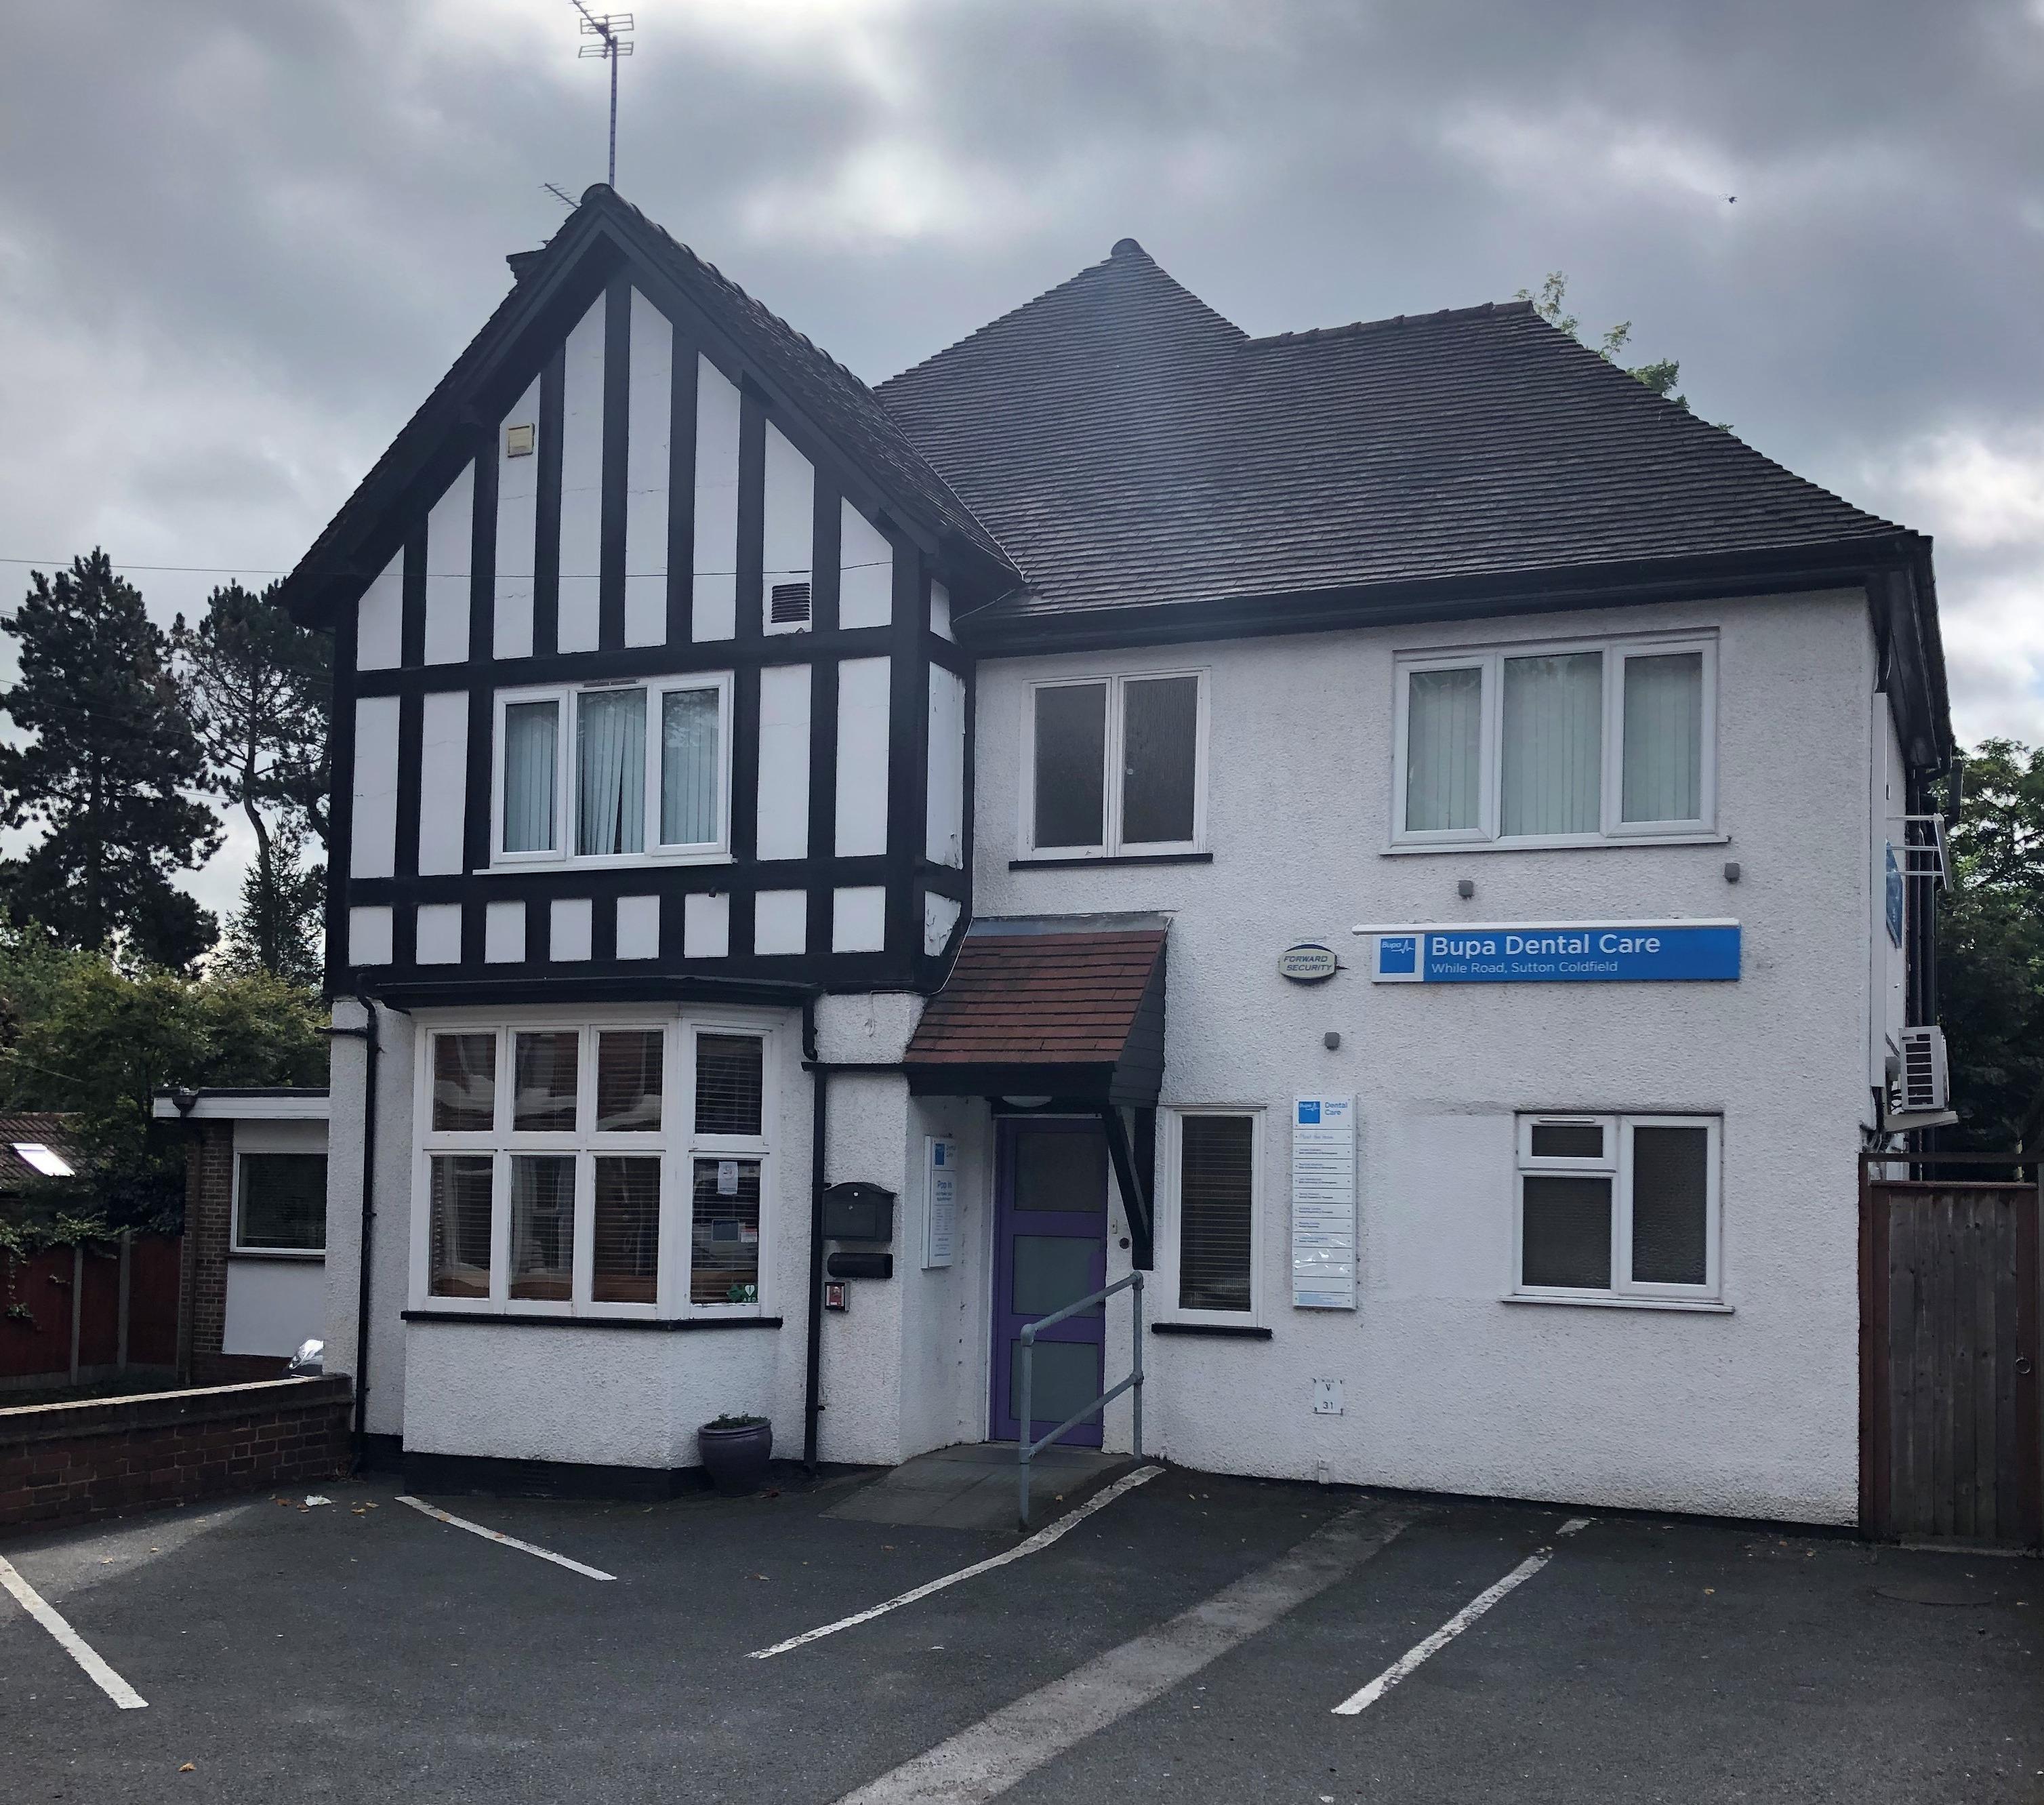 Images Bupa Dental Care Sutton Coldfield- While Road